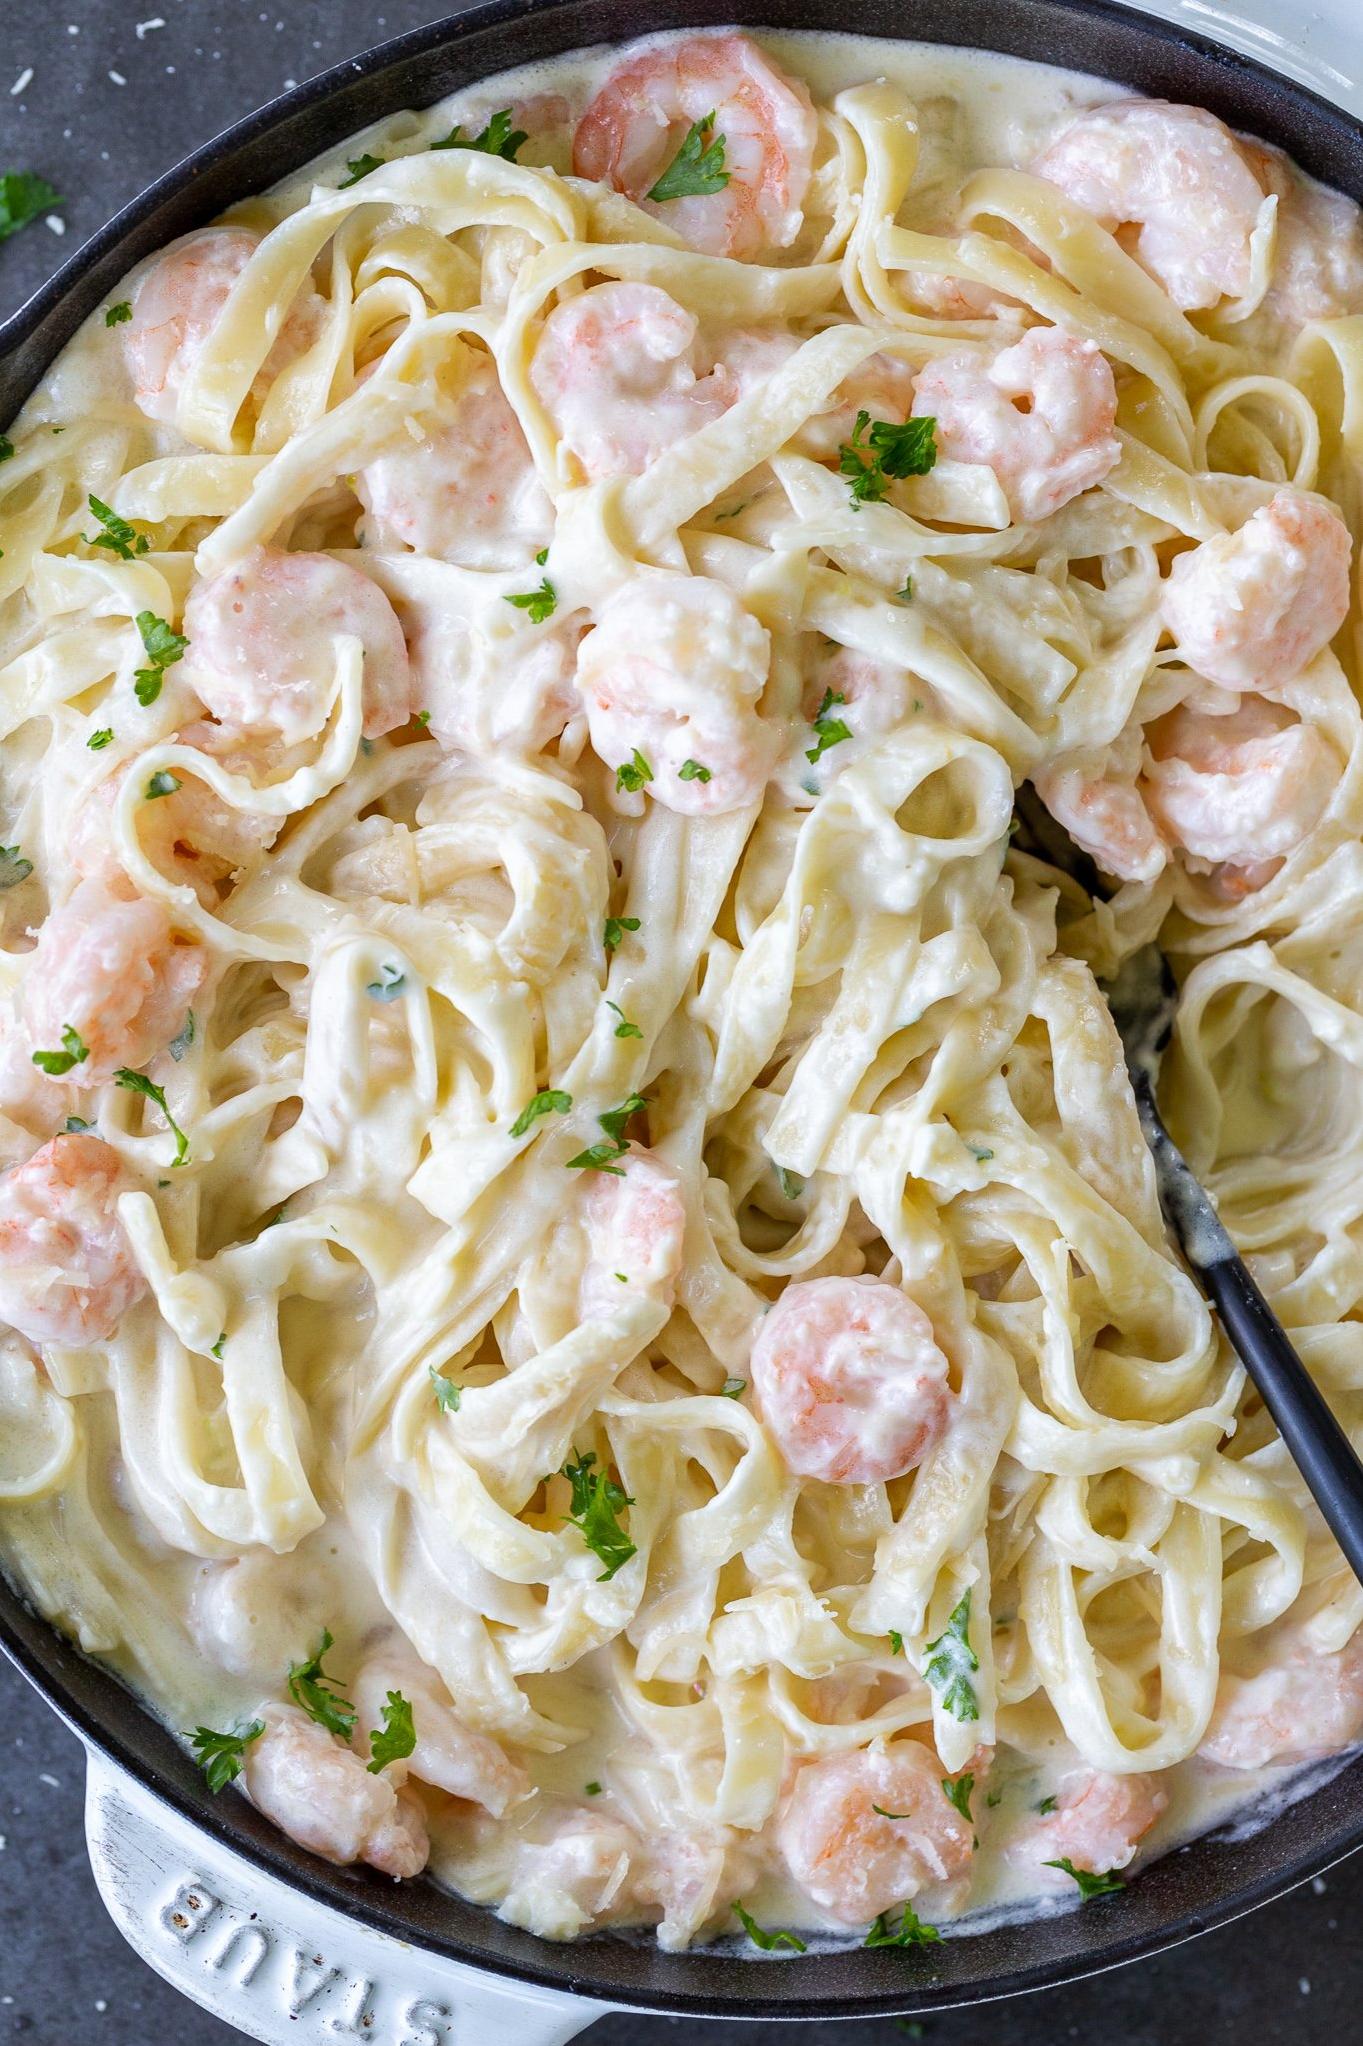  Don't be shellfish, treat yourself to some scrumptious shrimp fettuccine!